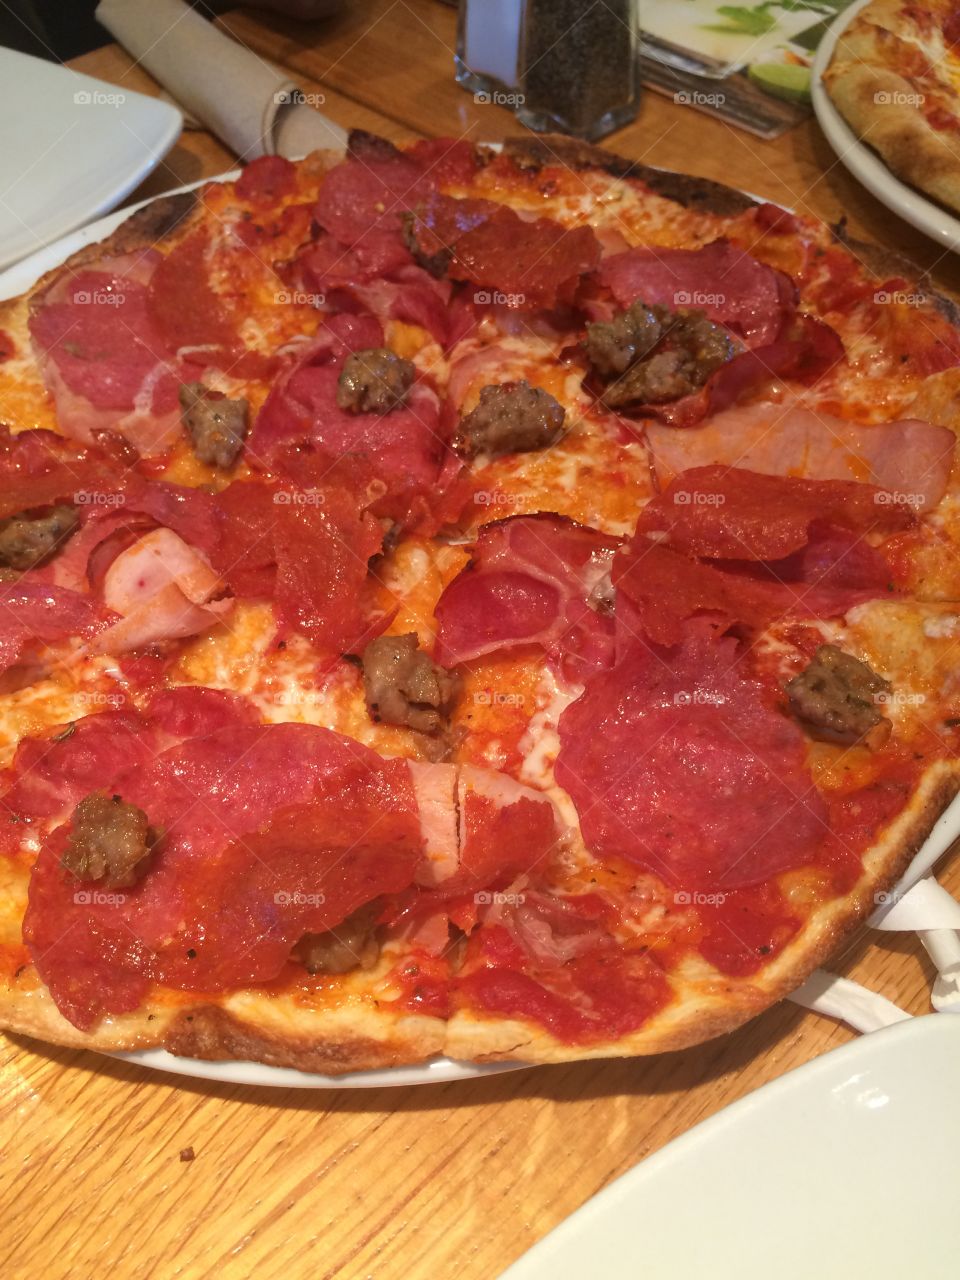 Pepperoni pizza. Tasty pepperoni pizza eating with family